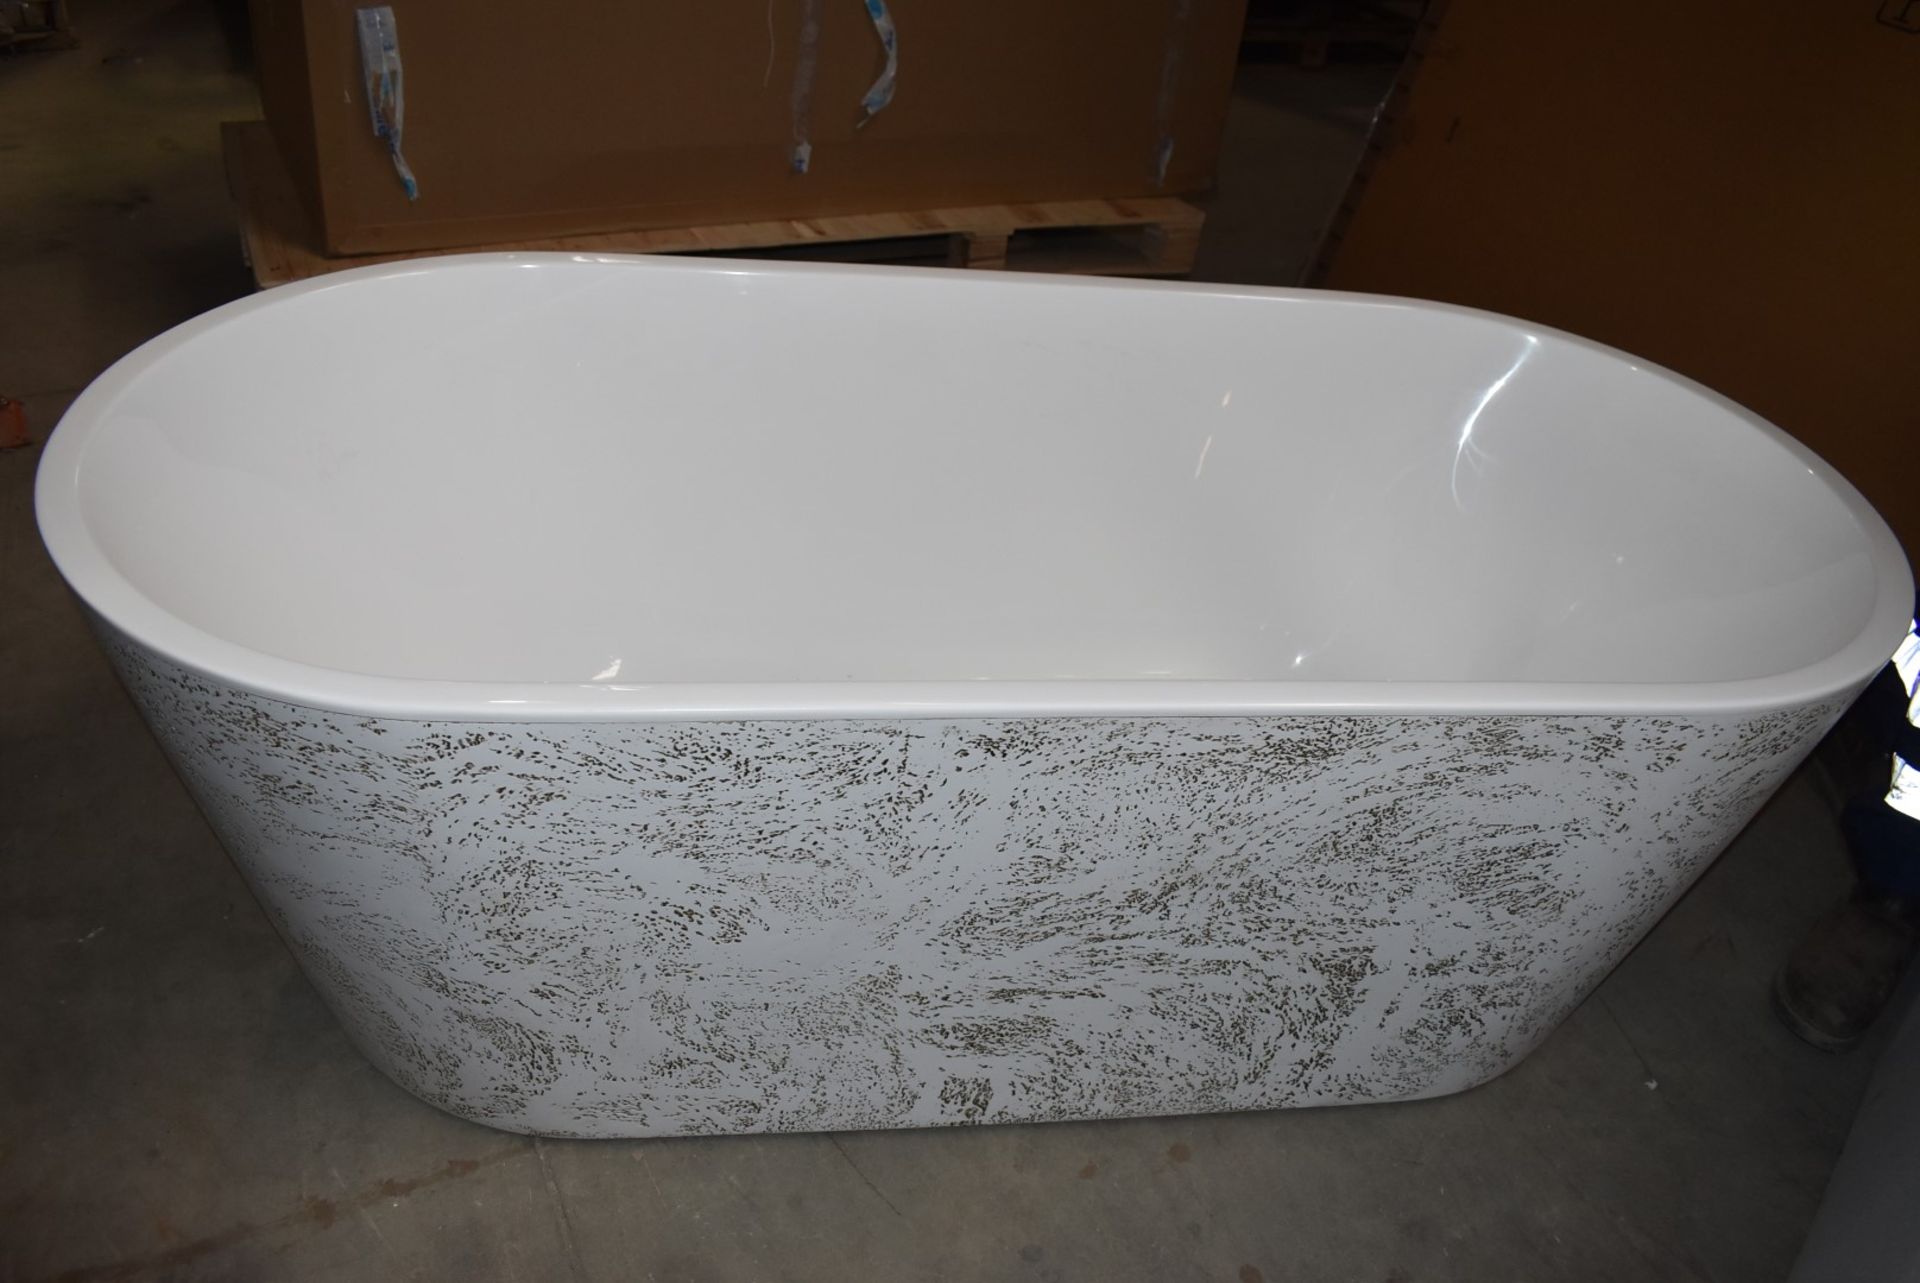 1 x Contemporary Freestanding Bath With a Tactile Textured Surround Panel - 1690mm Wide - New - Image 9 of 15